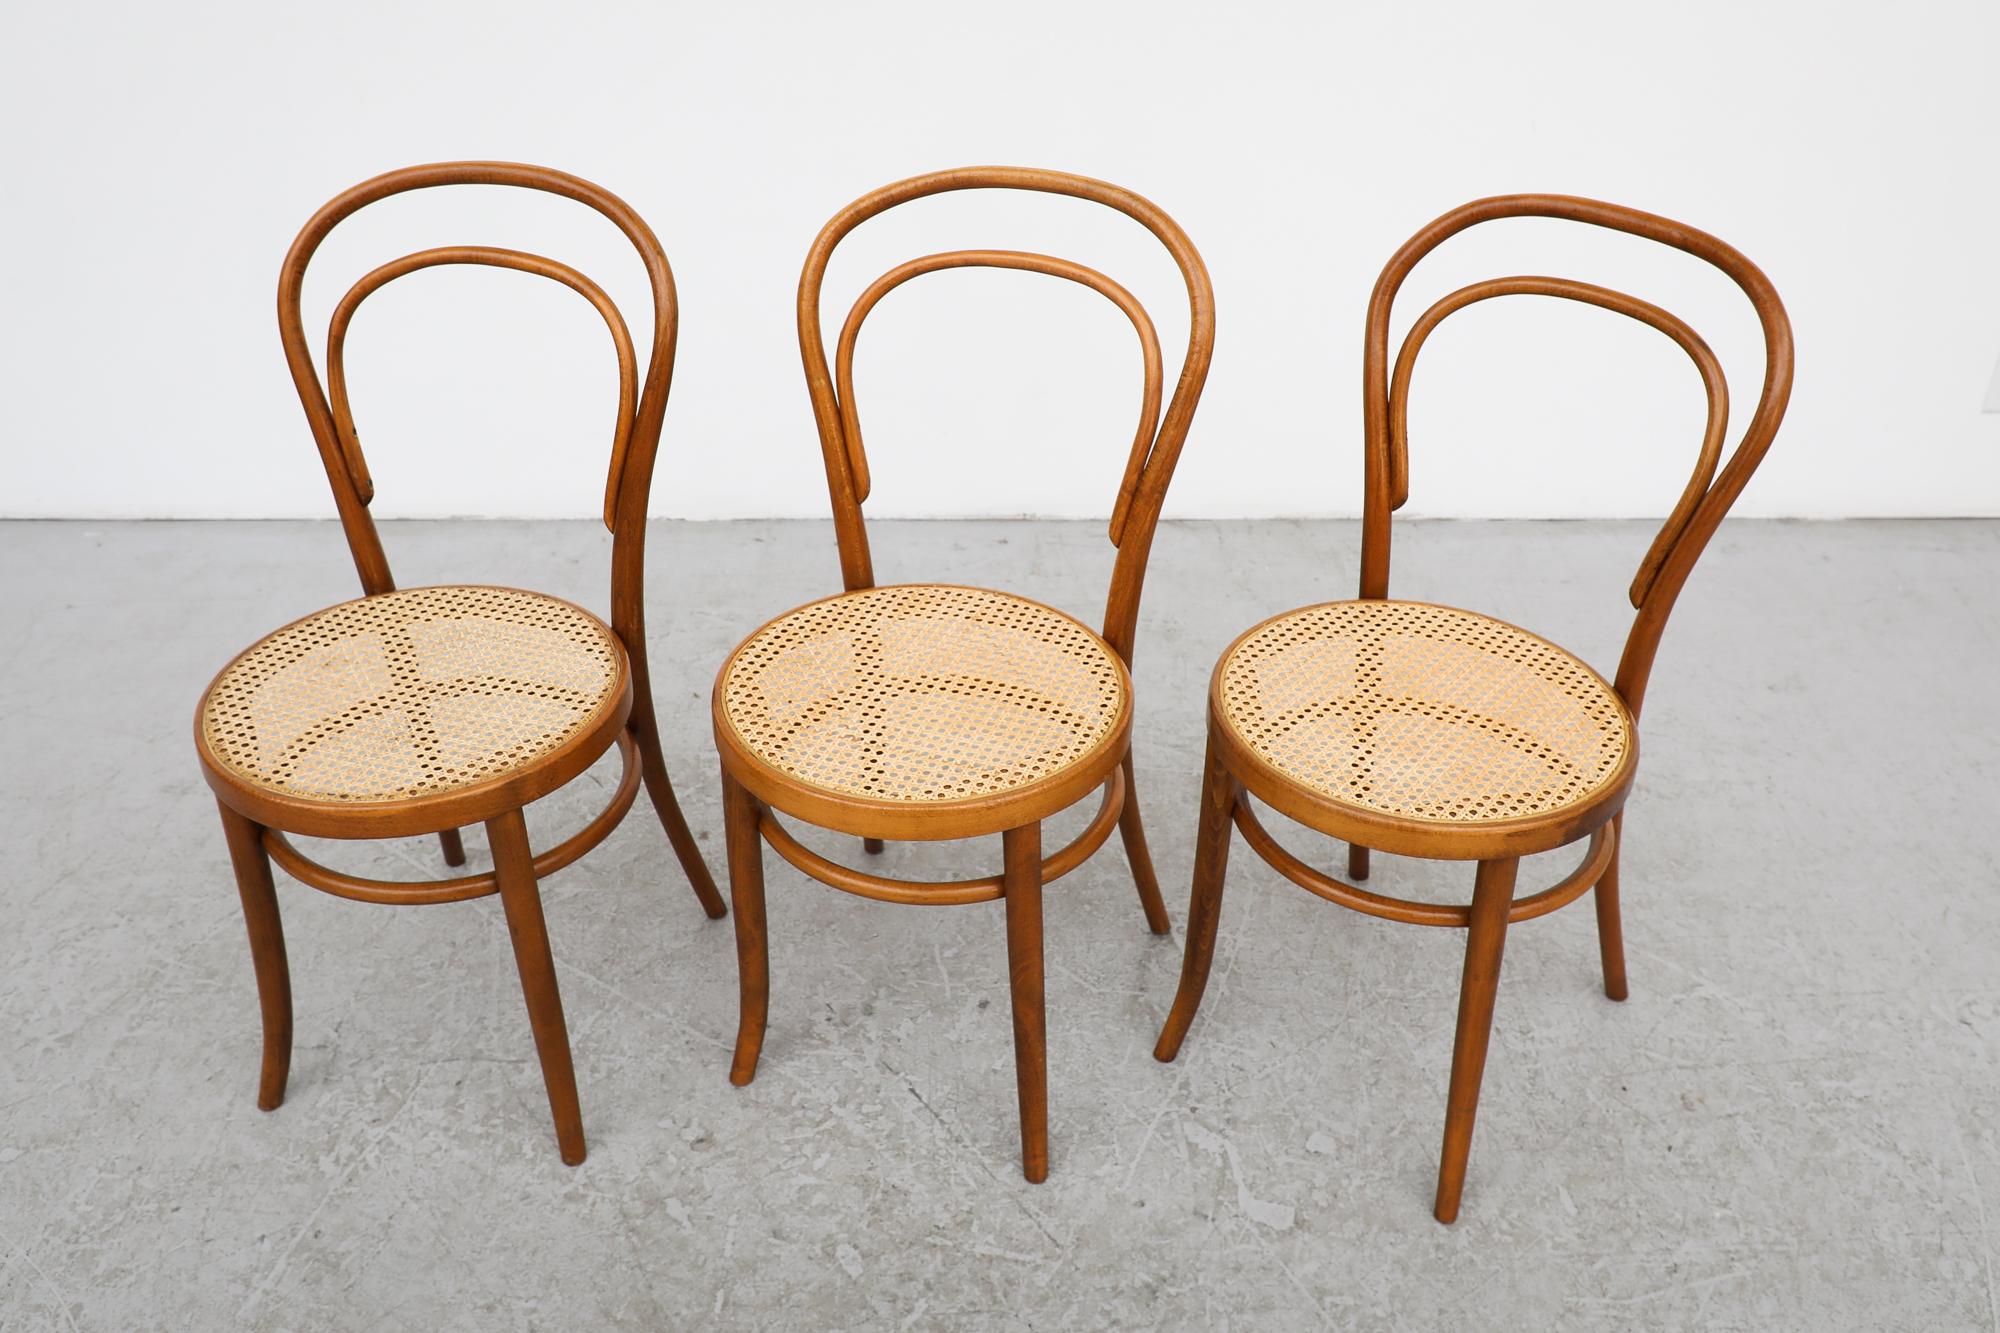 Vintage Thonet No. 14 Bentwood and Cane Café Side Chairs with Cane Seats In Good Condition For Sale In Los Angeles, CA